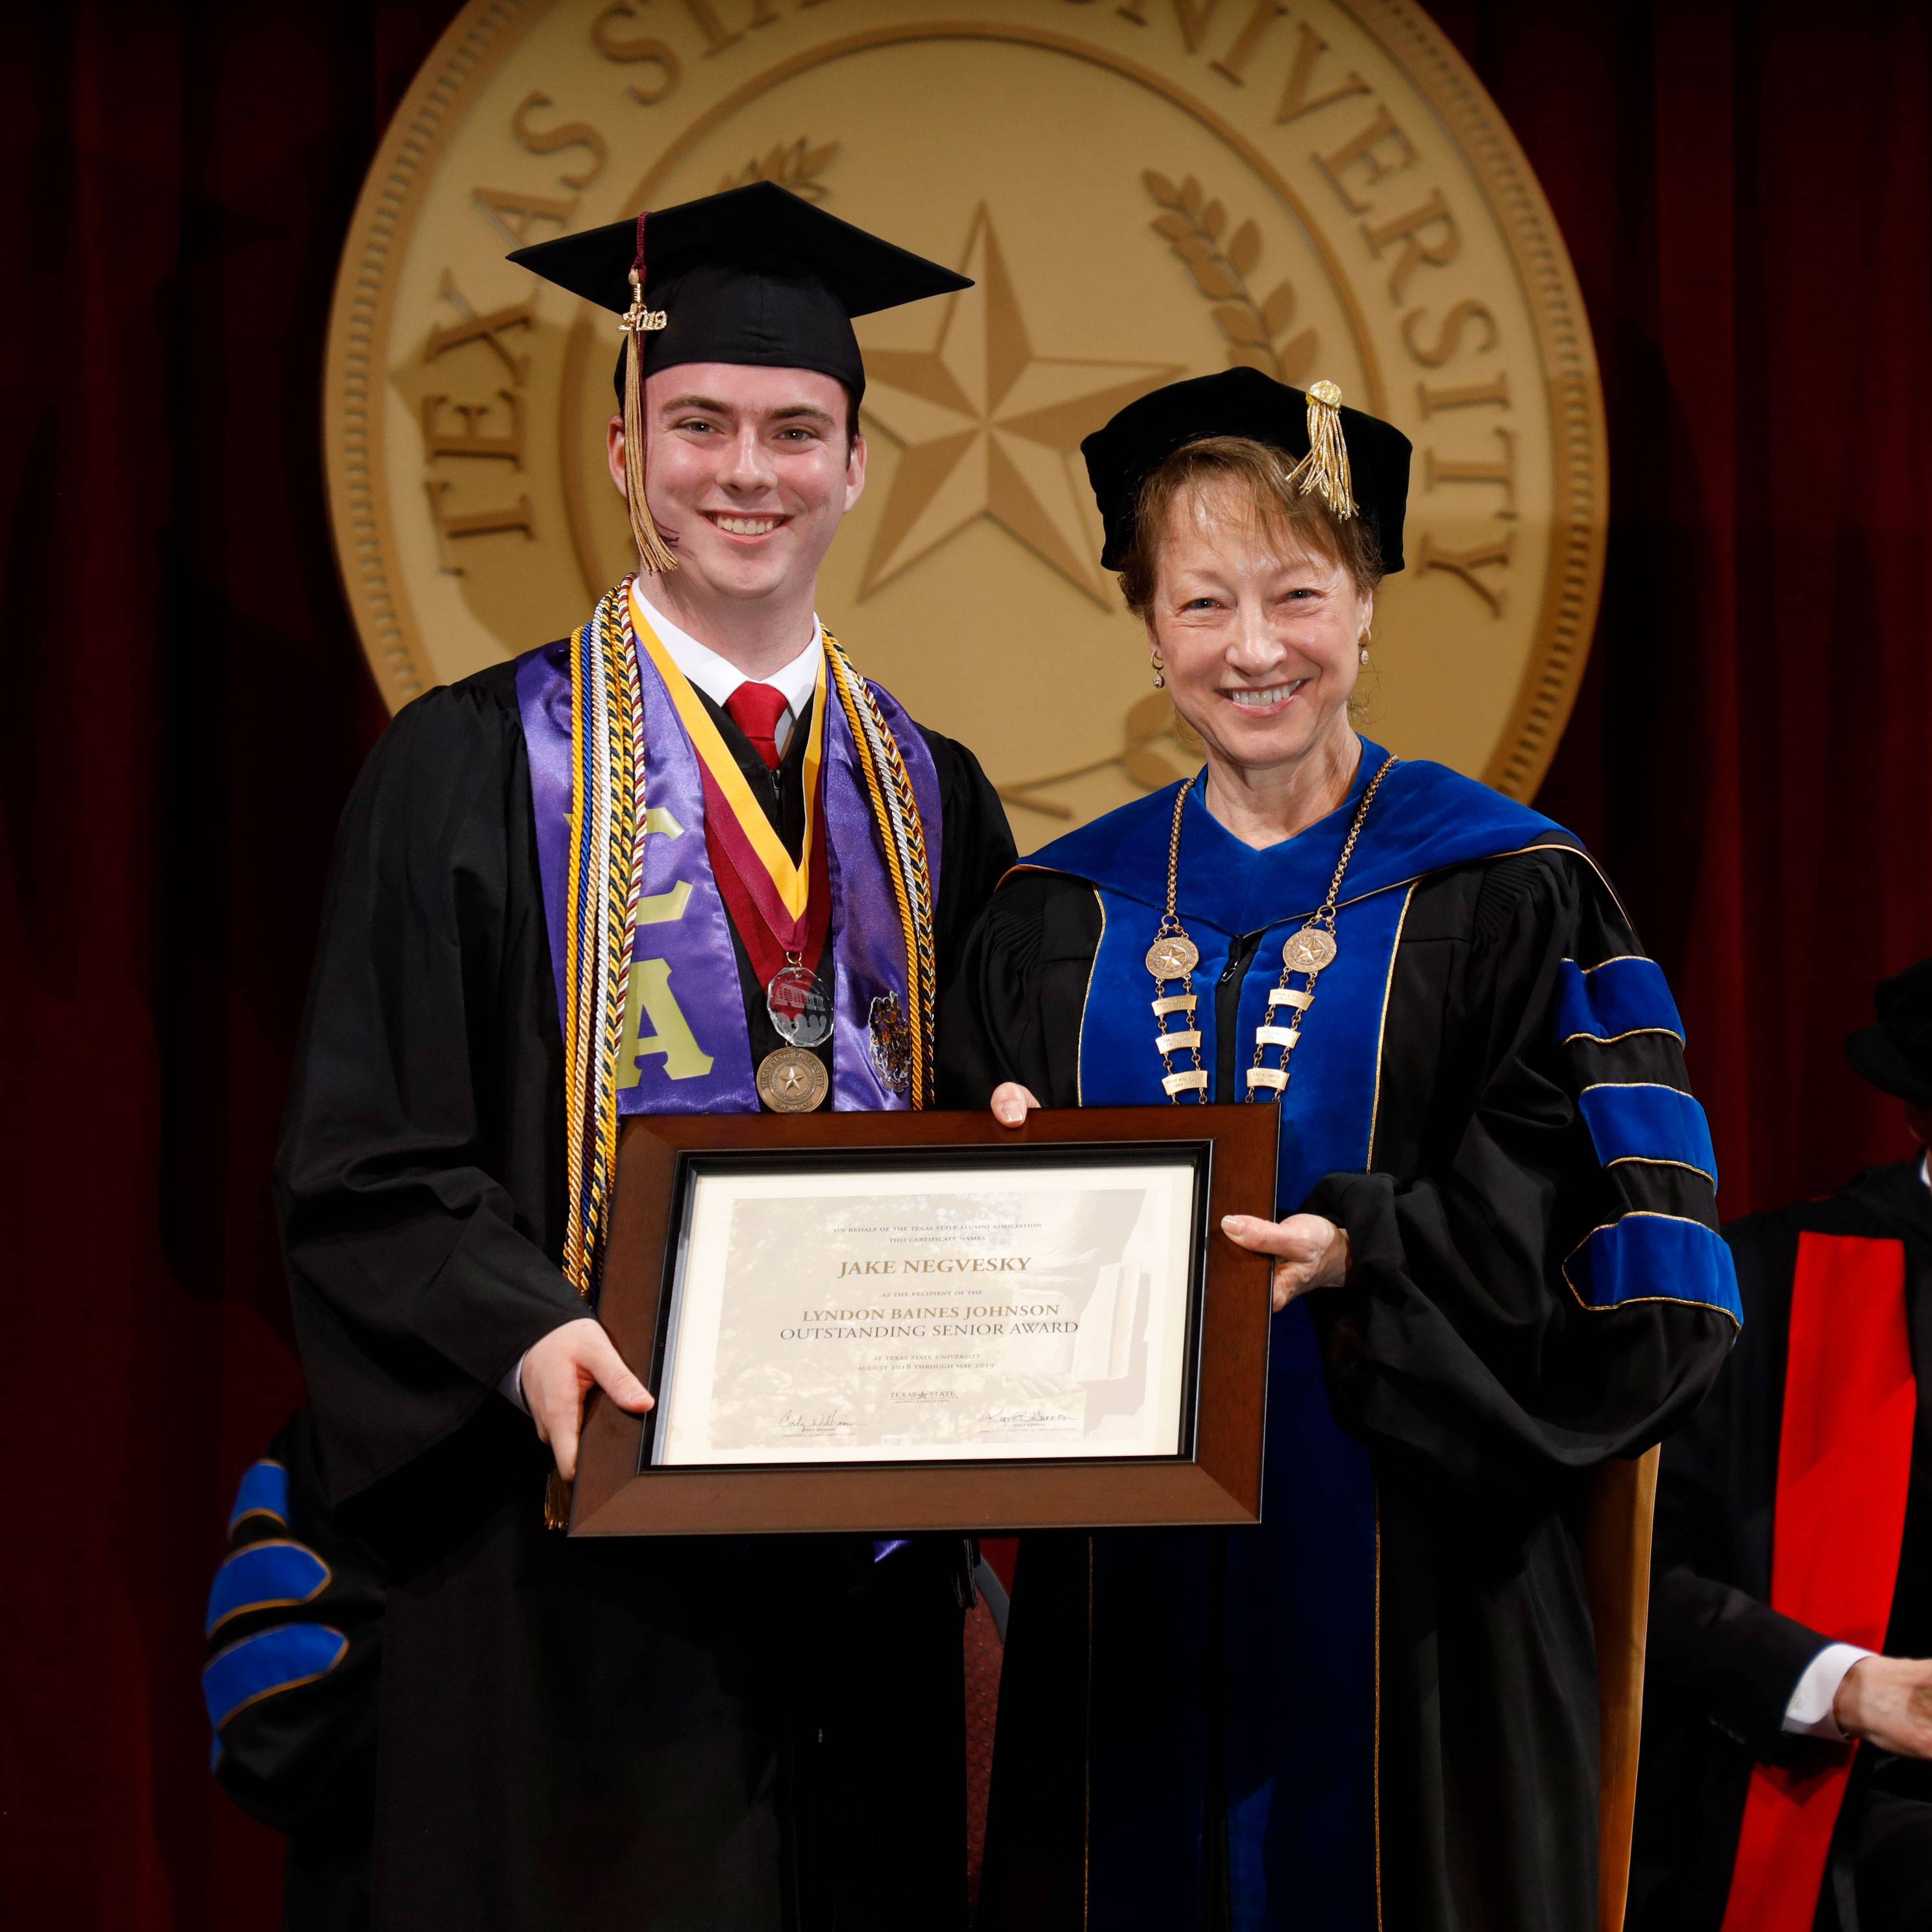 Jake Negvesky and President Denise Trauth at Commencement